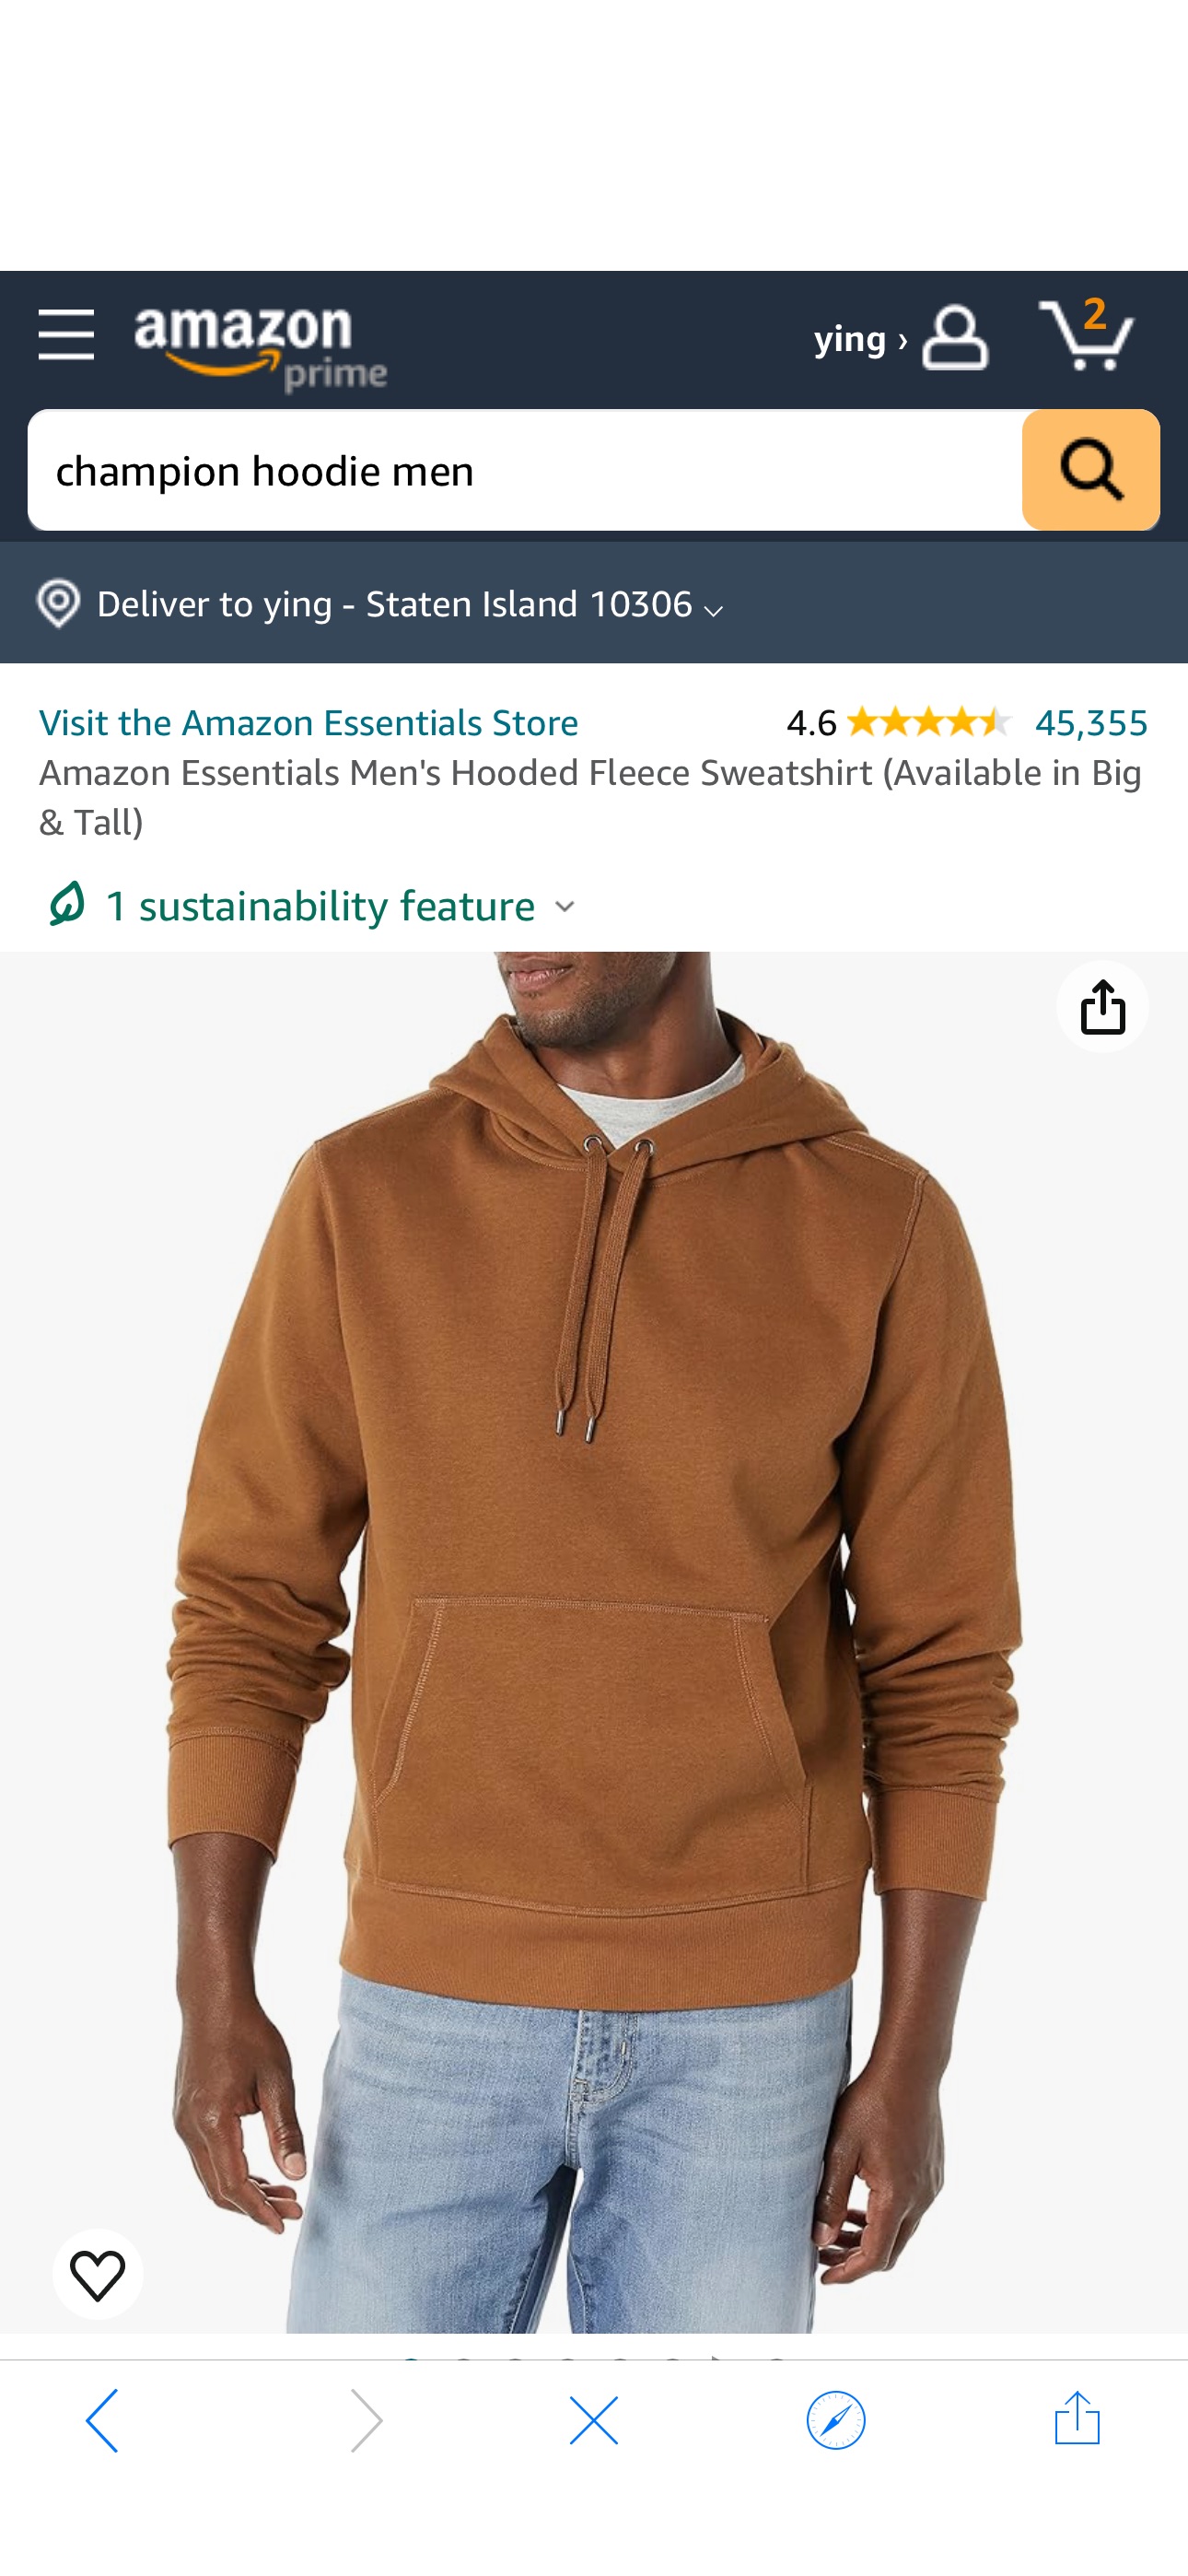 Amazon.com: Amazon Essentials Men's Hooded Fleece Sweatshirt (Available in Big & Tall), Toffee Brown, X-Small : Clothing, Shoes & Jewelry